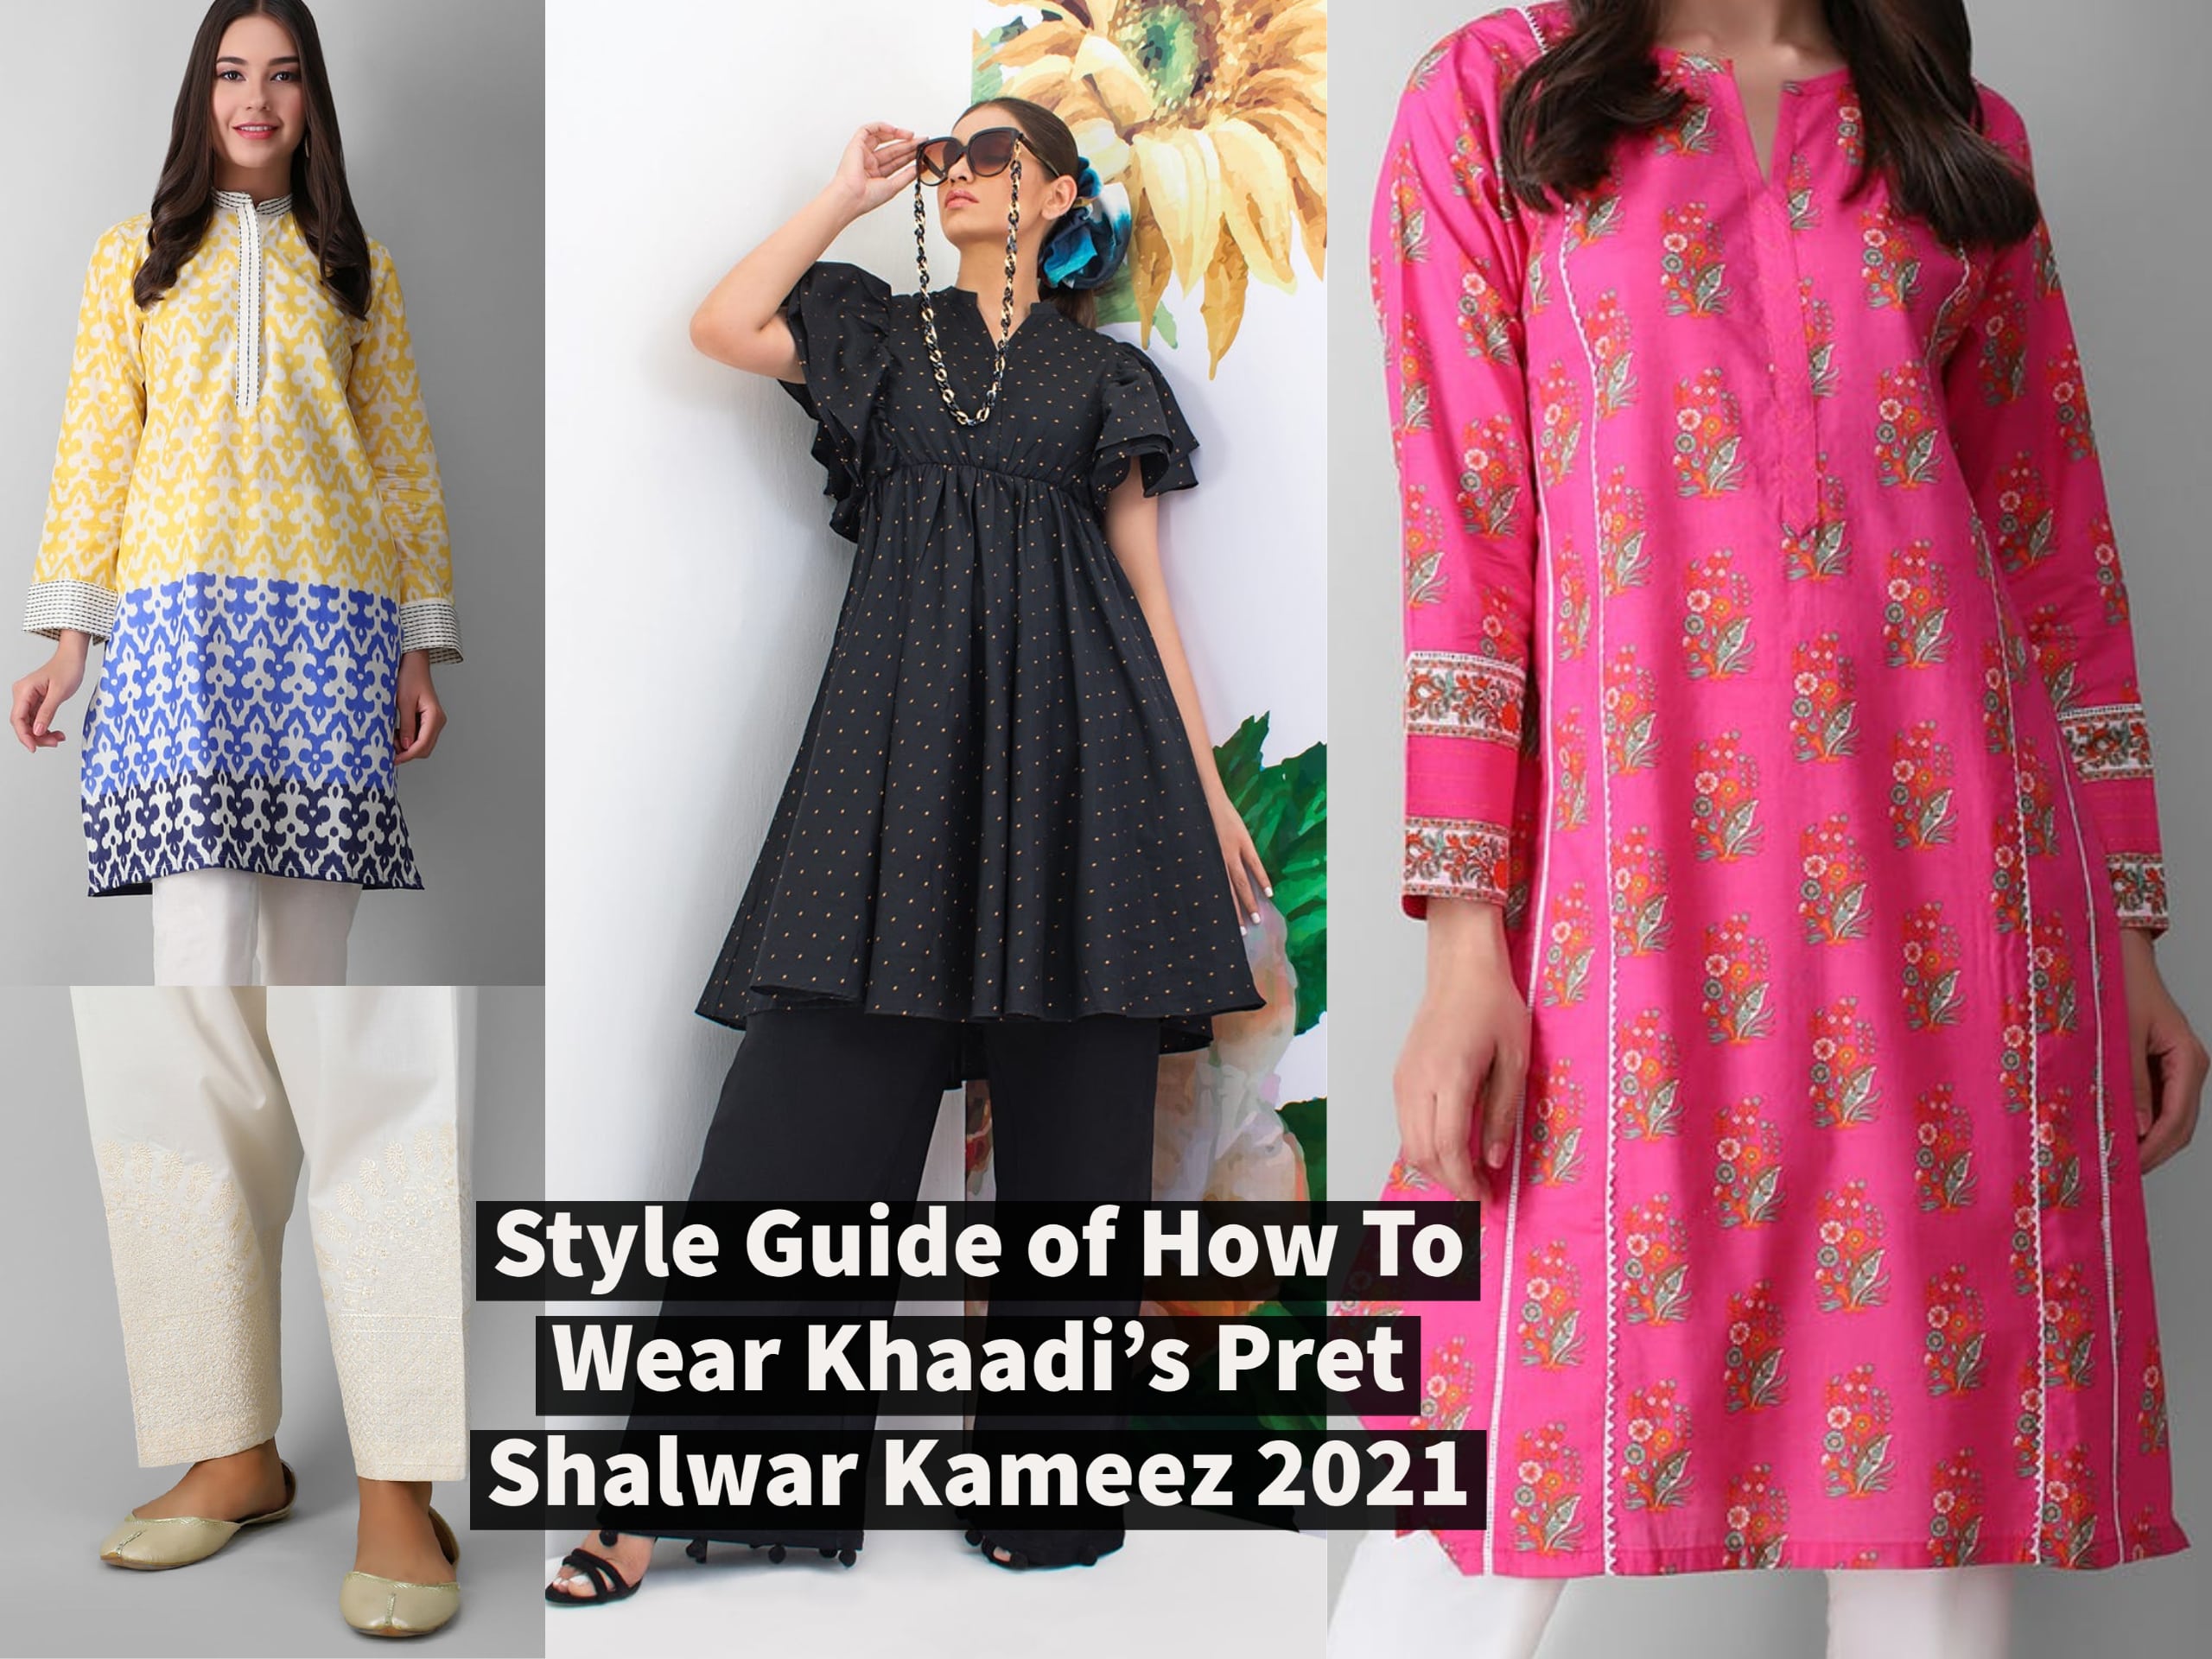 Style Guide of How To Wear Khaadi Pret Shalwar Kameez 2021